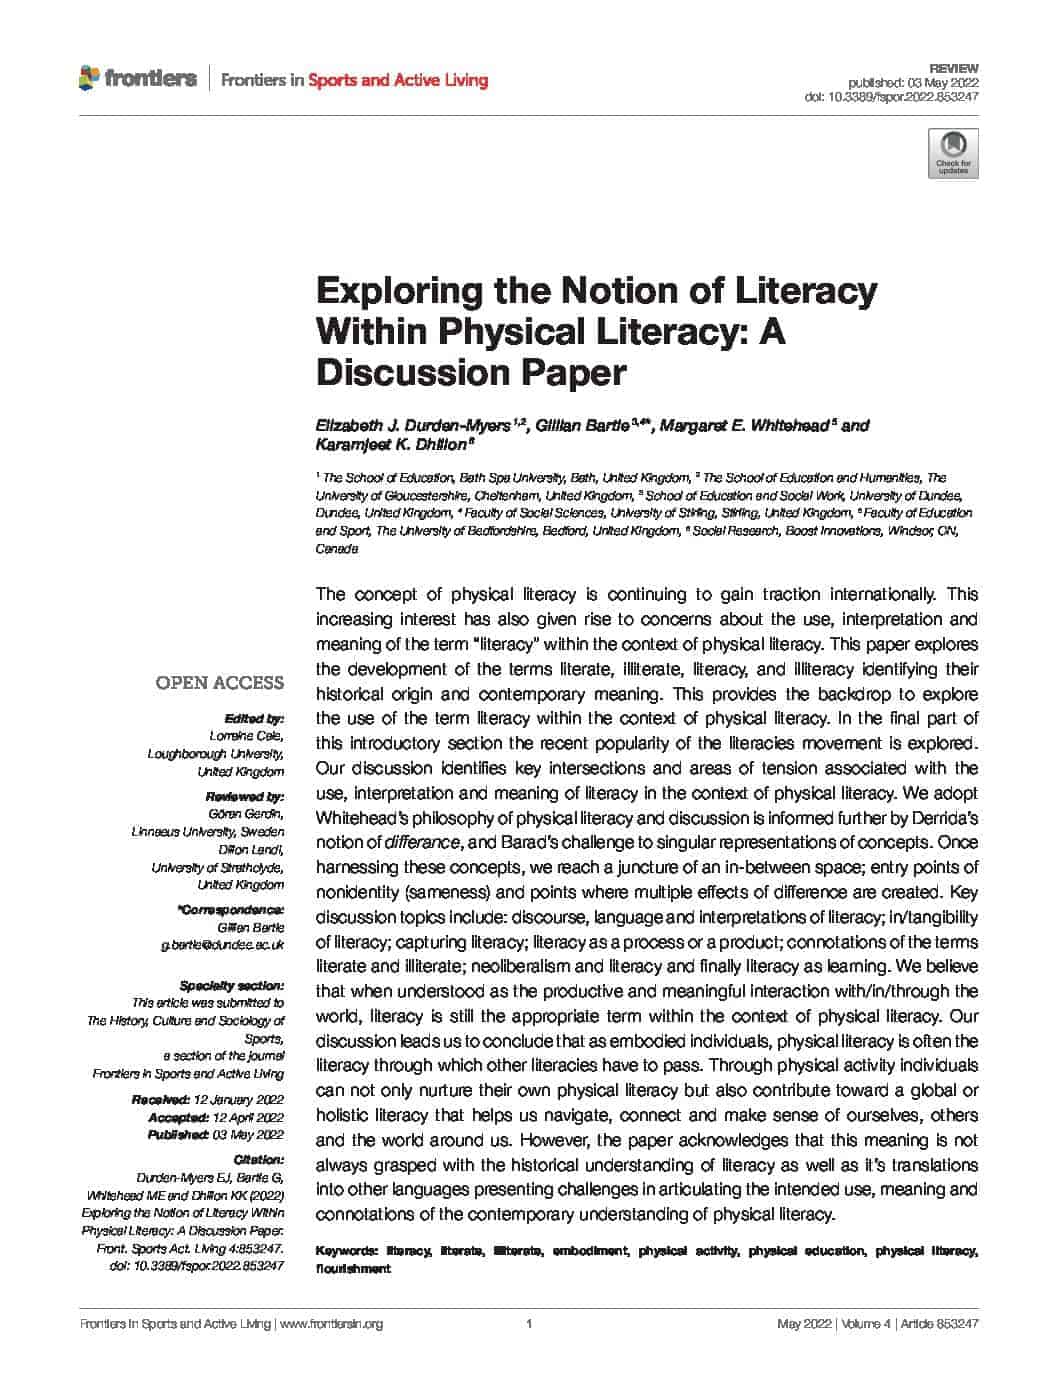 Exploring the Notion of Literacy Within Physical Literacy